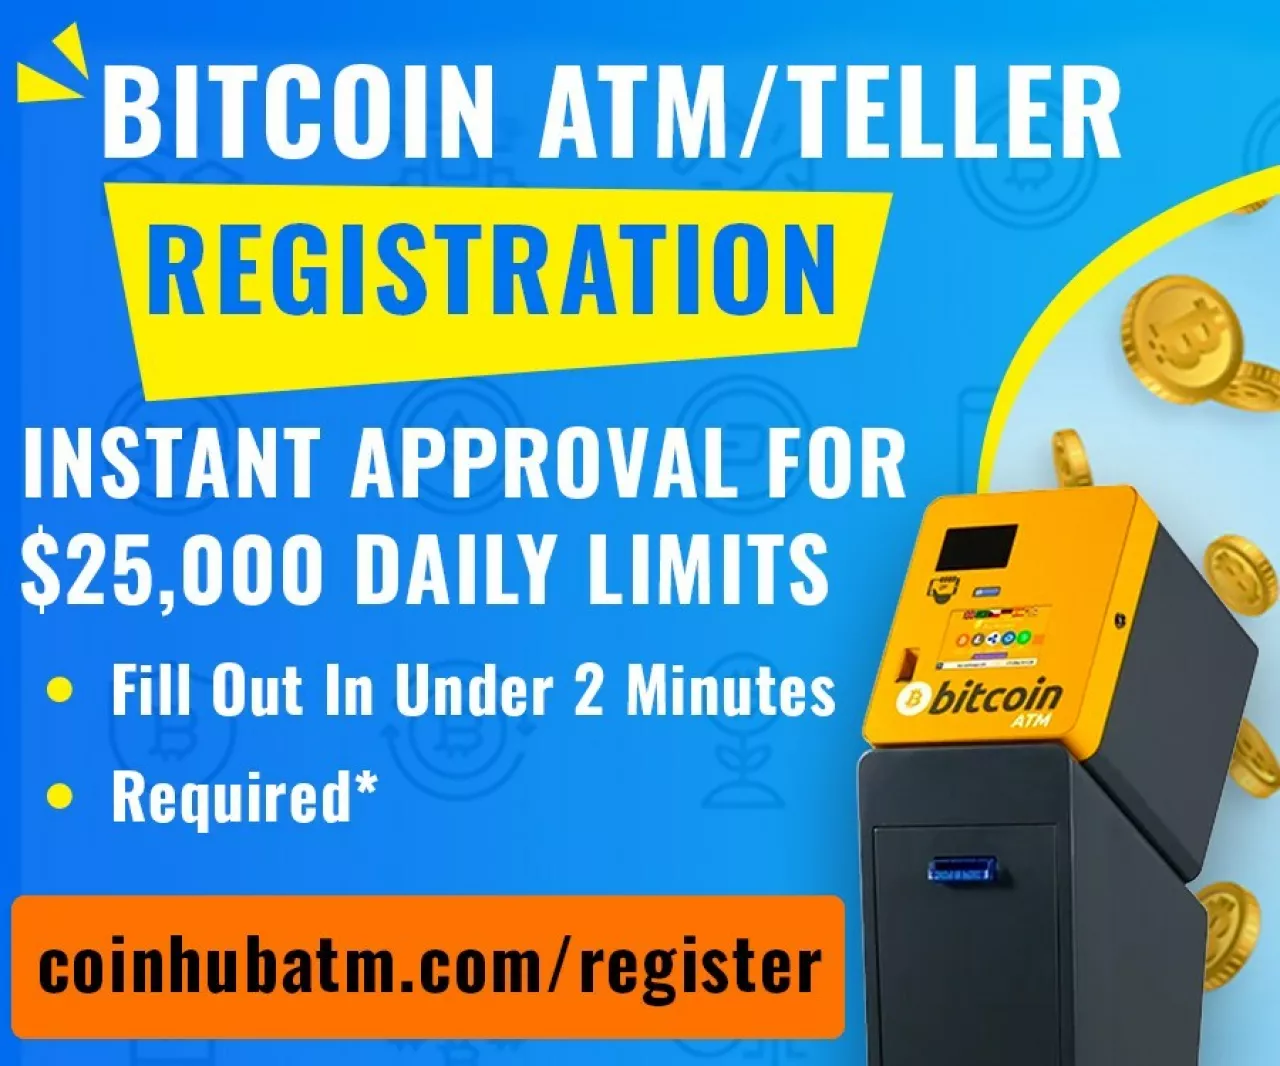 To register at a Coinhub Bitcoin ATM for high limit approval, visit the CoinhubATM website. img#2